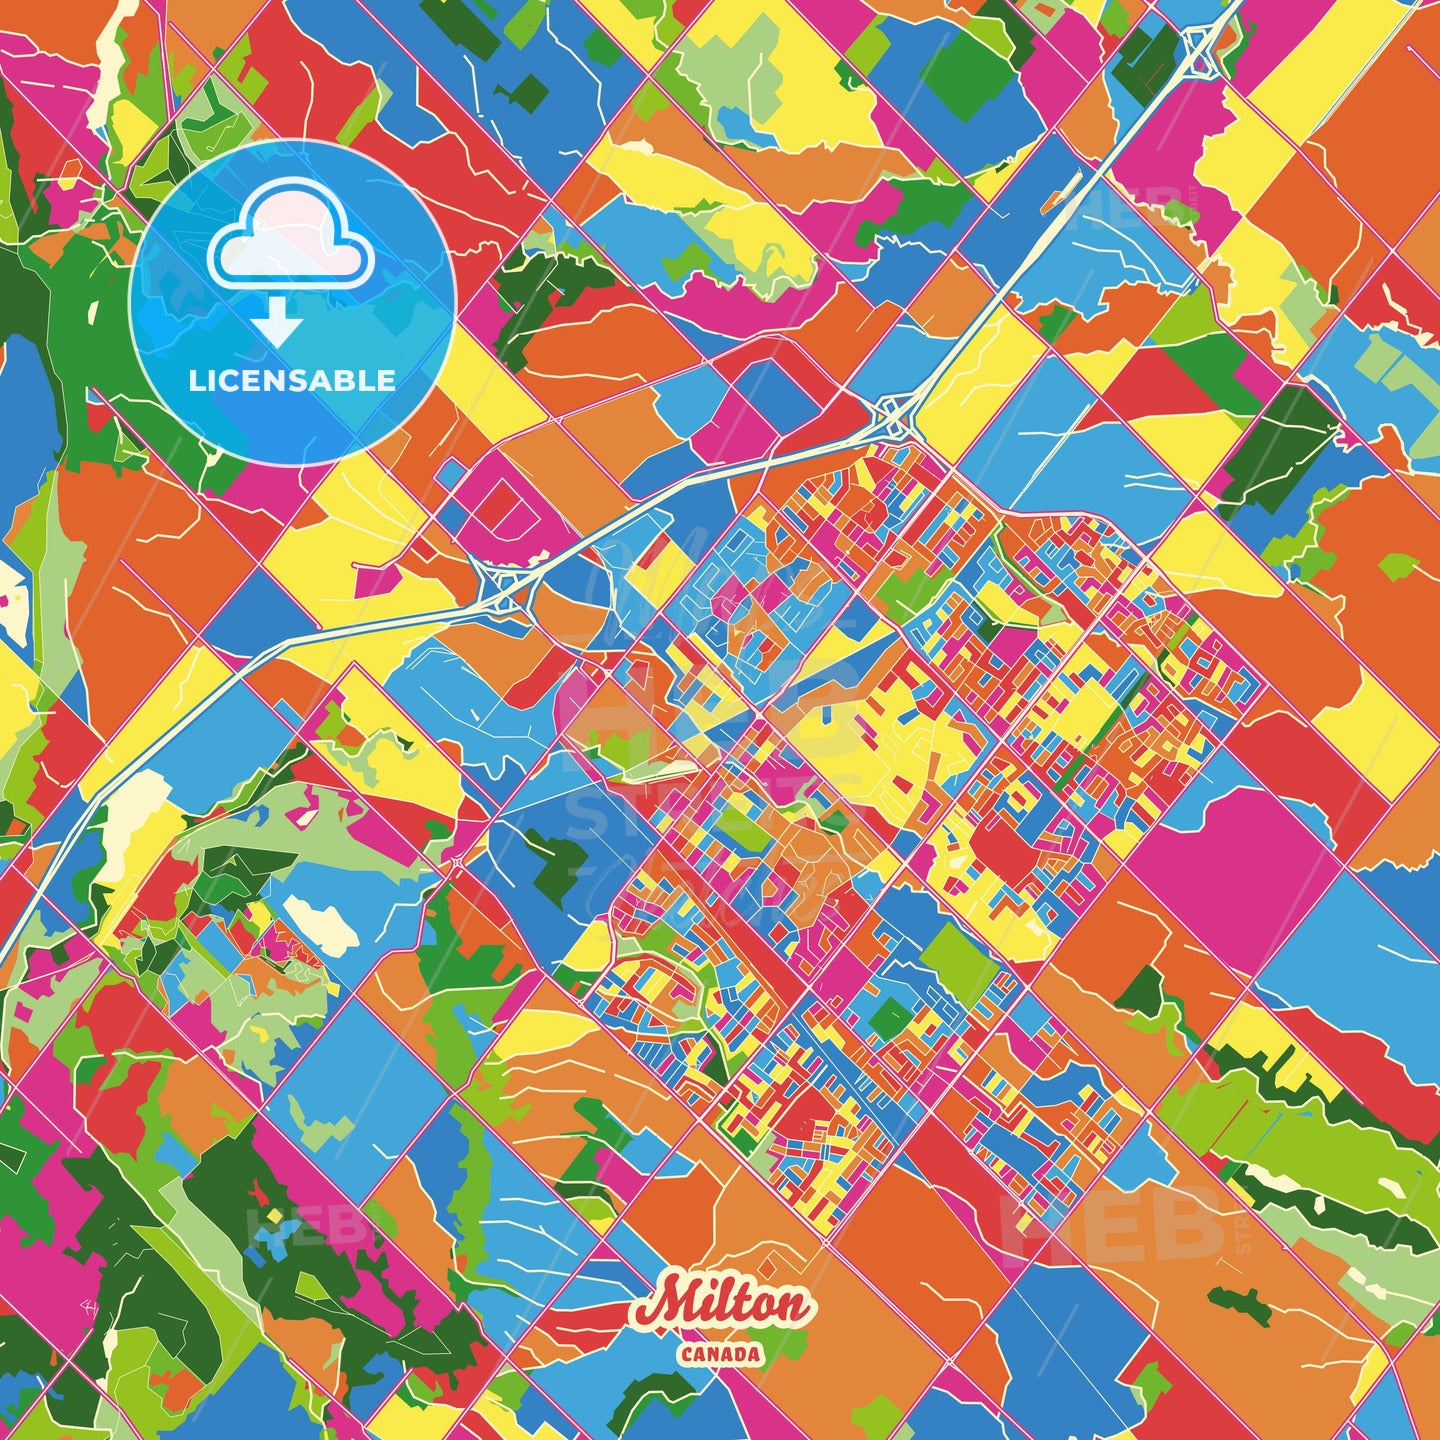 Milton, Canada Crazy Colorful Street Map Poster Template - HEBSTREITS Sketches